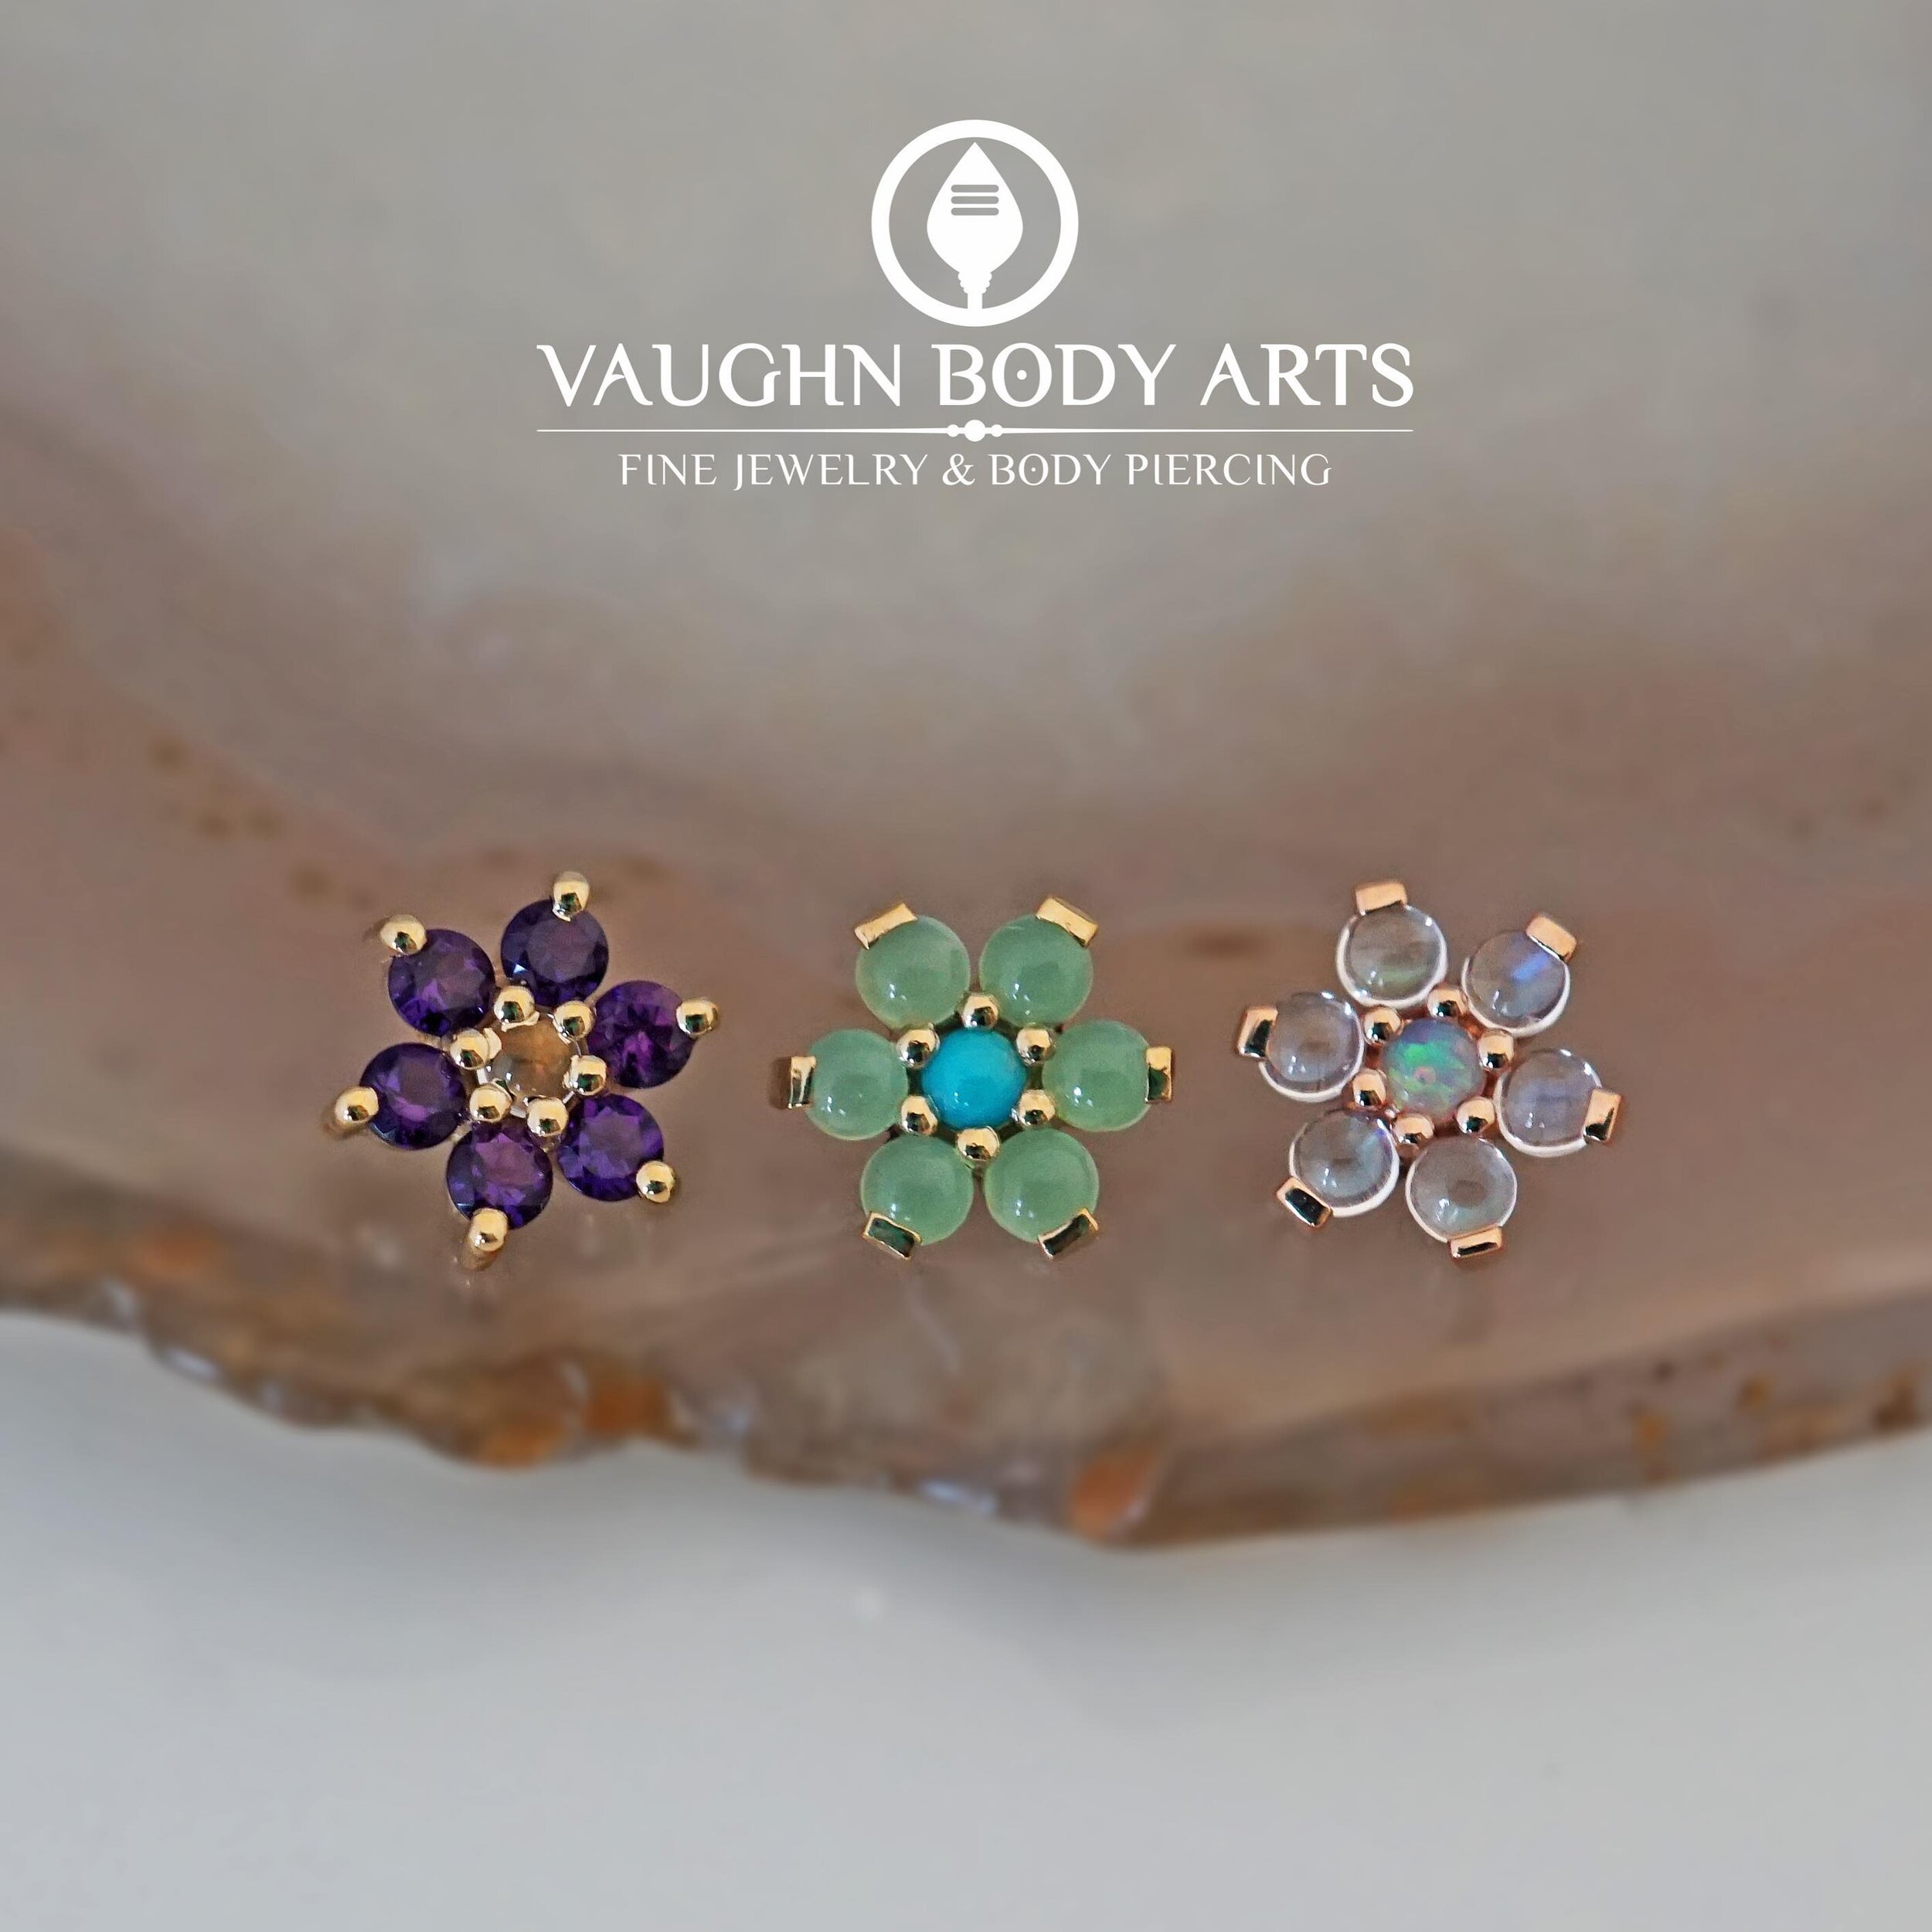 April showers bring May flowers!

These flower ends we received from BVLA are just dreamy. Amethyst and Rose Quartz set in yellow gold, Chrysoprase and Turquoise set in yellow gold, and Rainbow Moonstone and White Opal set in rose gold.

Which one do